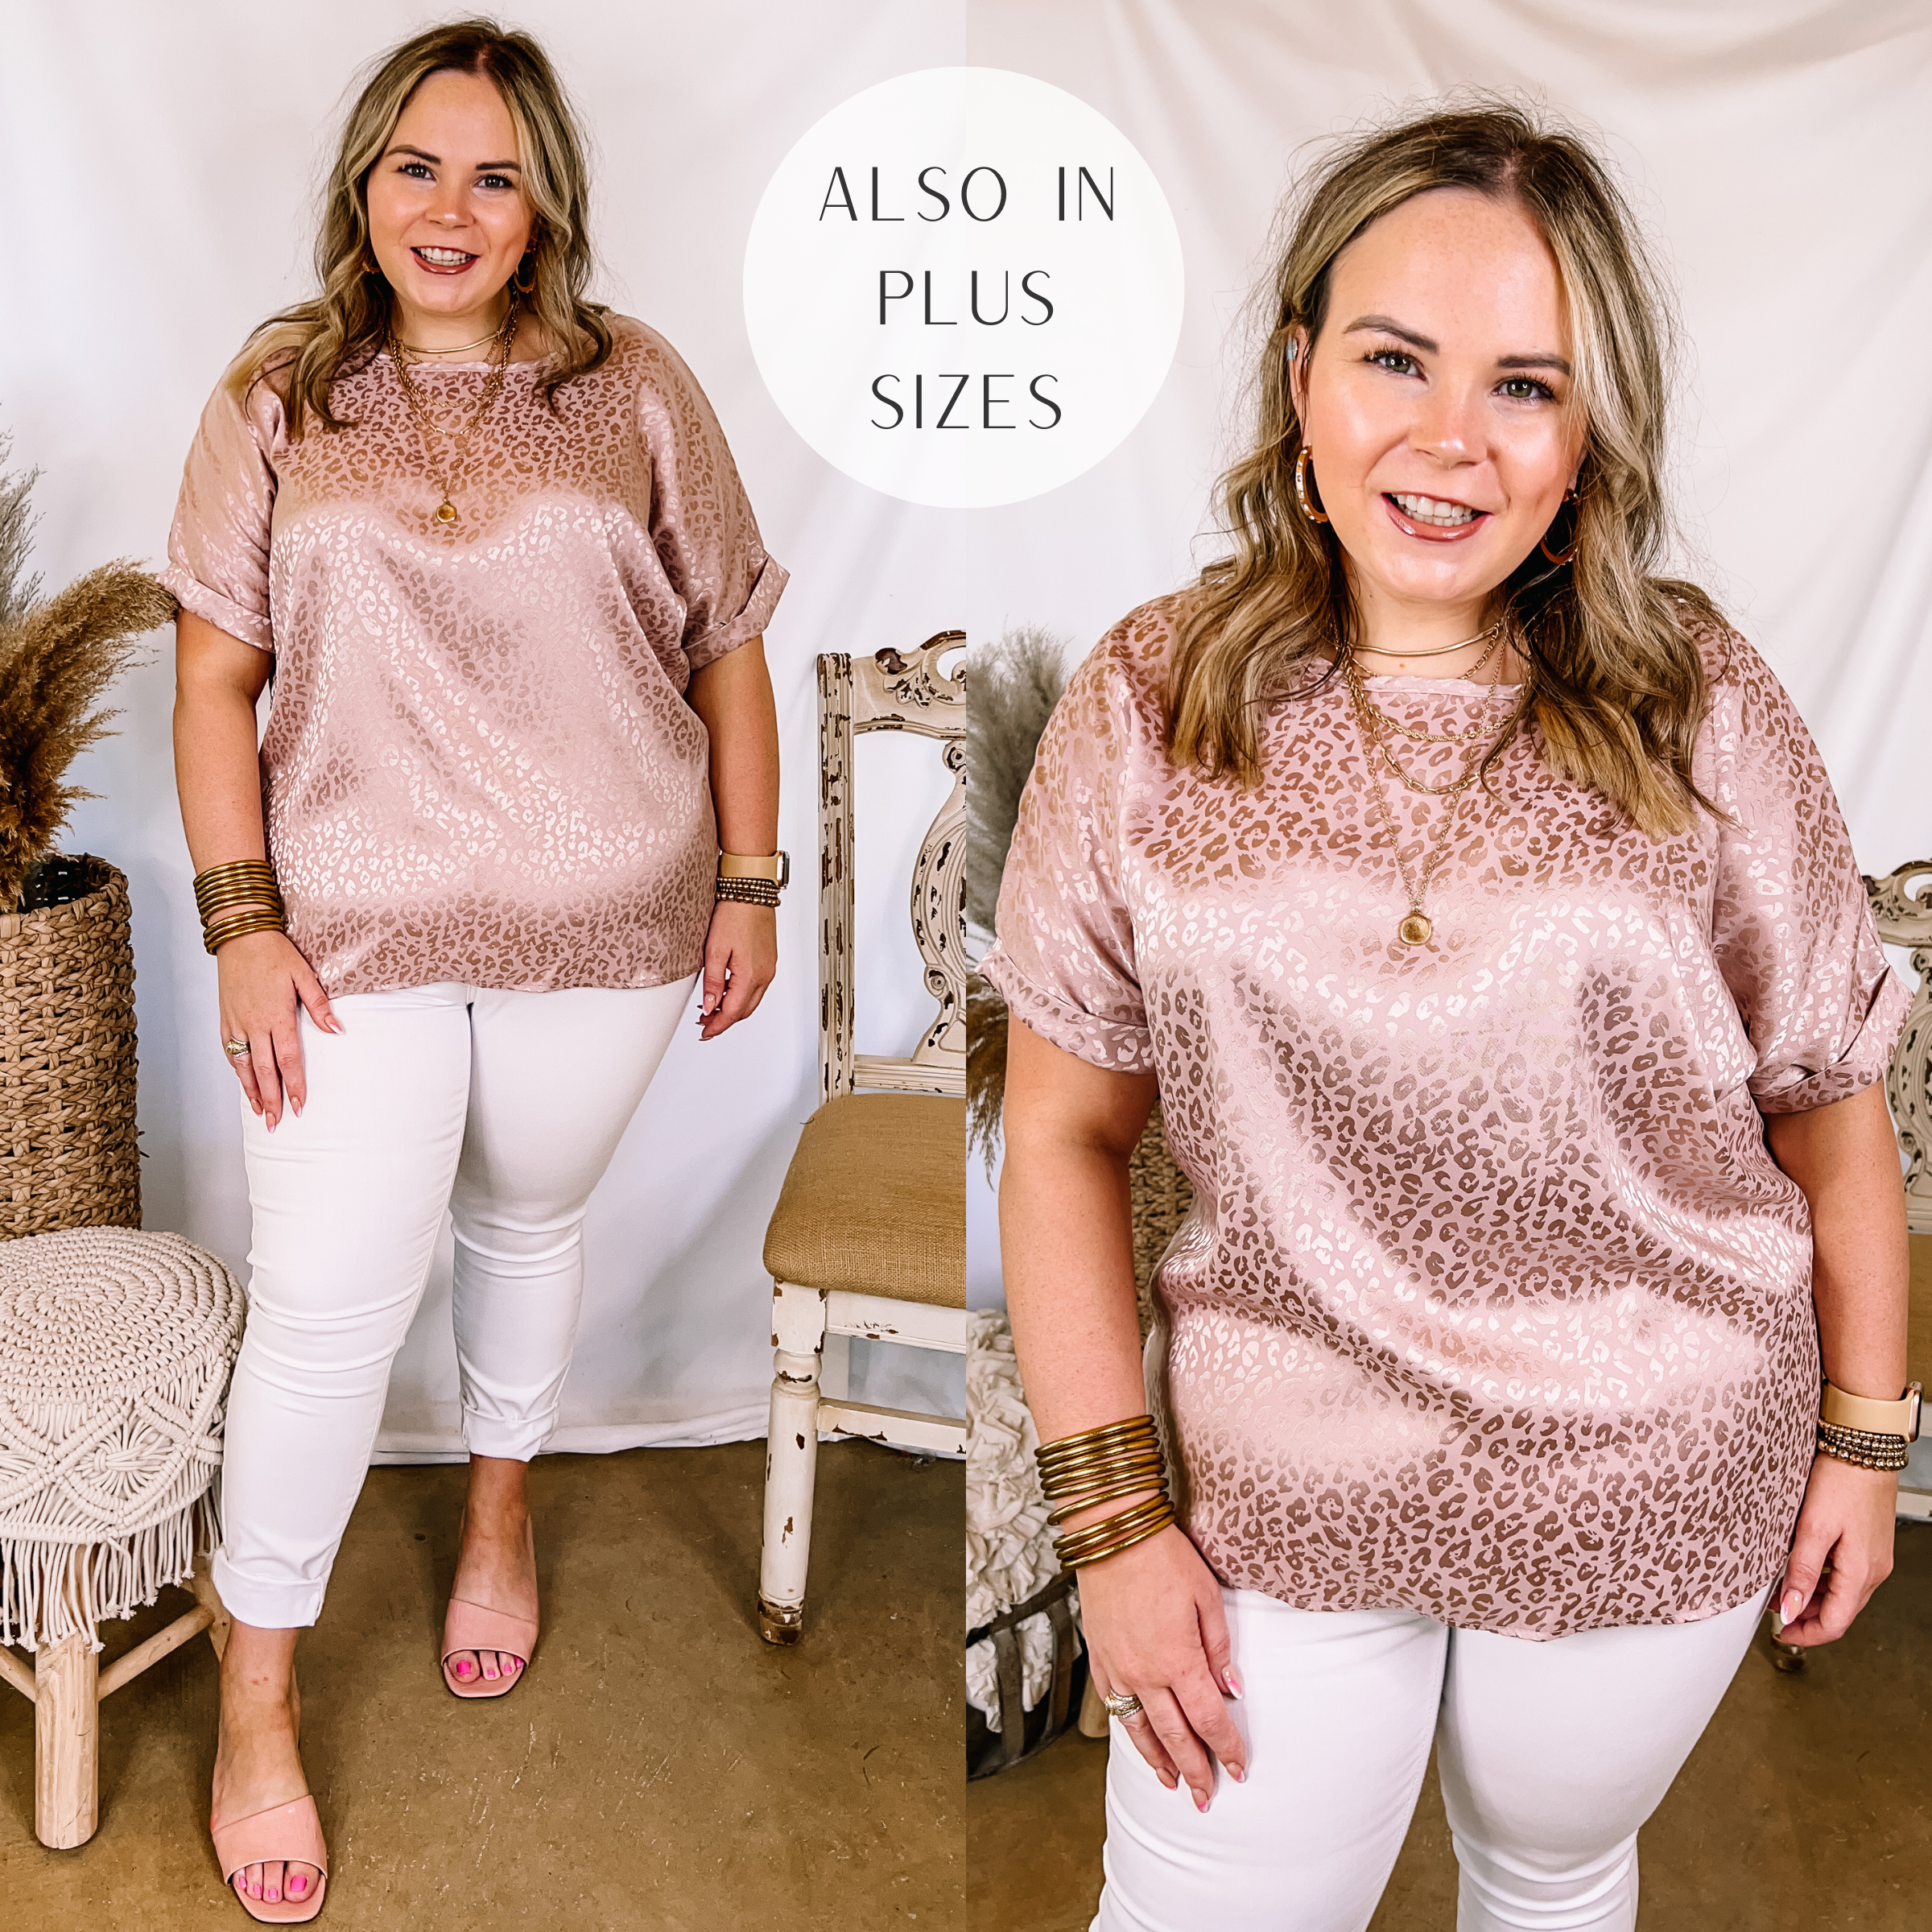 Model is wearing a mauve pink leopard print top that is a shiny satin material. Model has this top paired with white jeans, pink block heels, and gold jewelry.